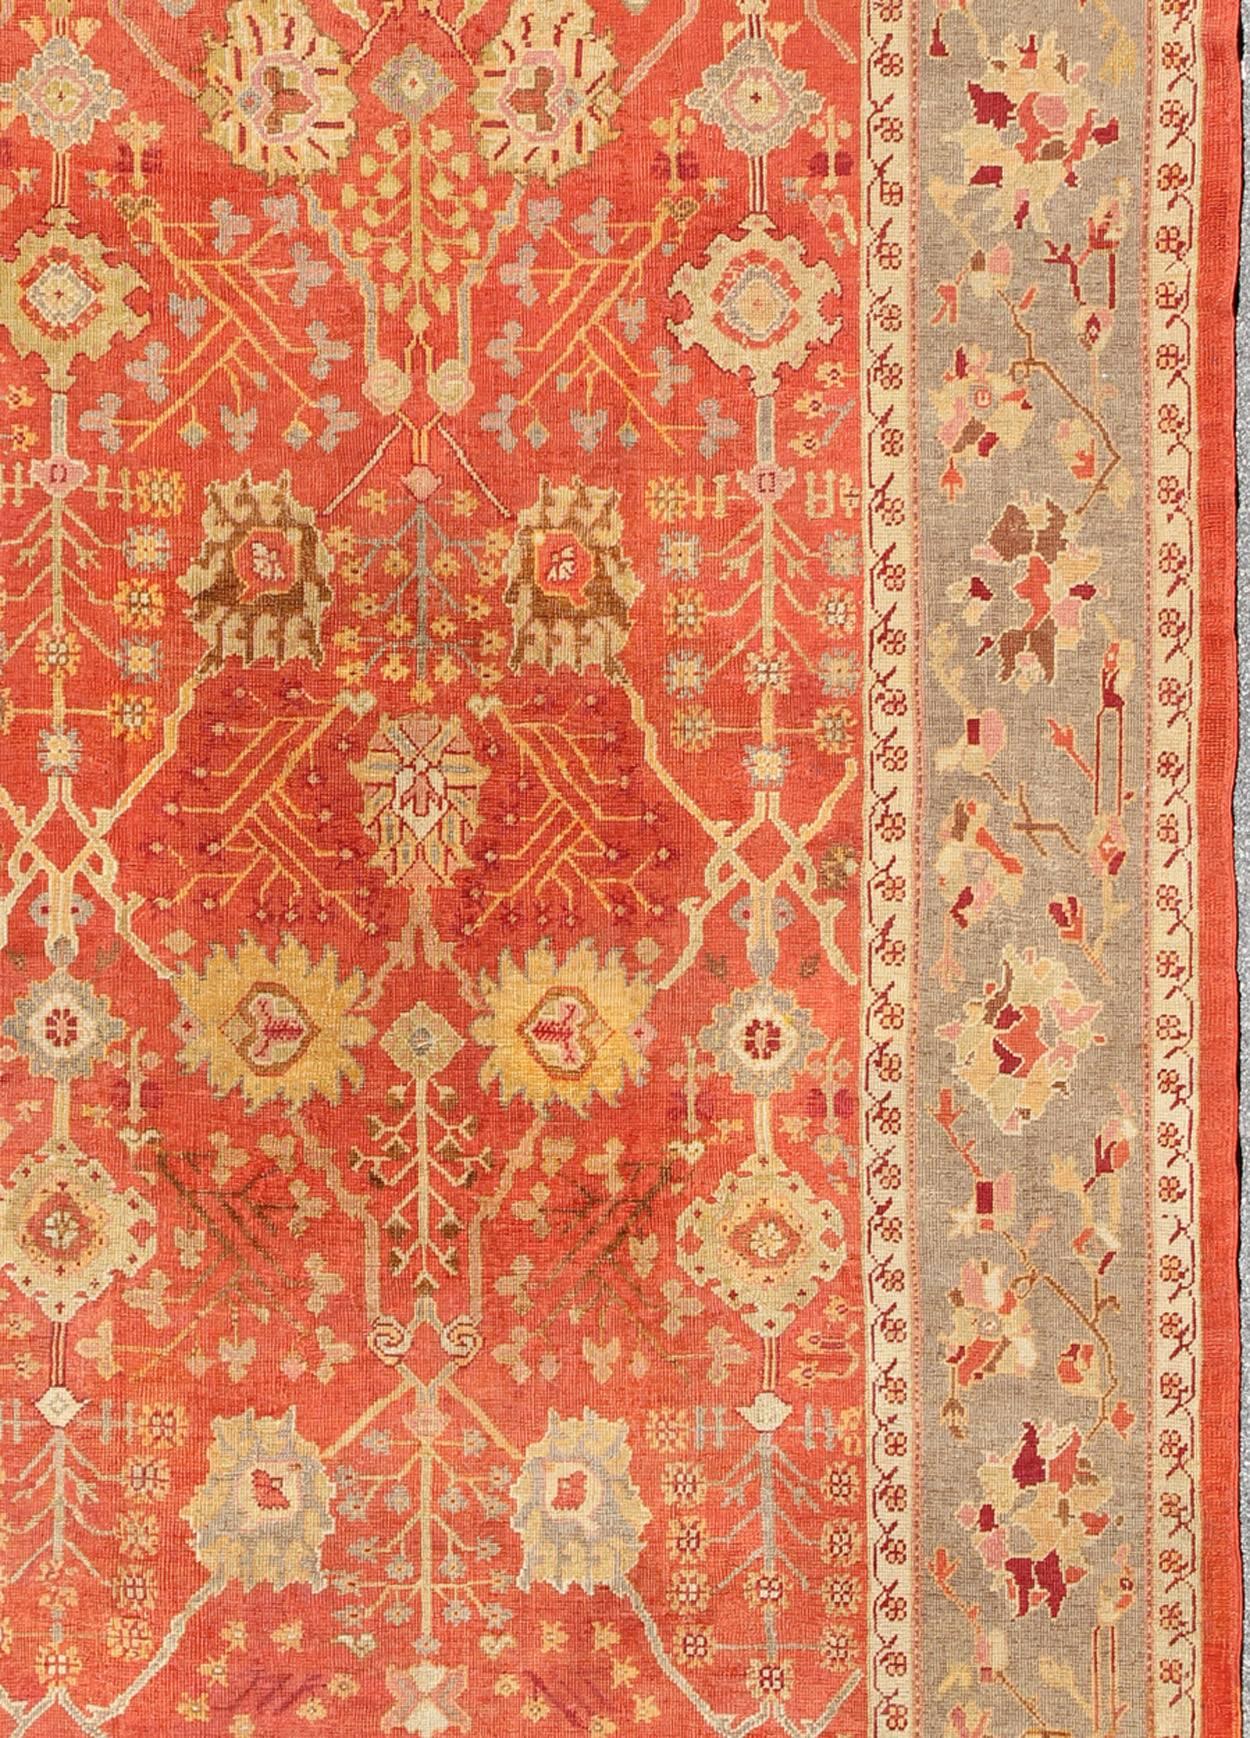  Antique Turkish Oushak Rug With All-Over Design On Orange Red Gray Border In Good Condition For Sale In Atlanta, GA